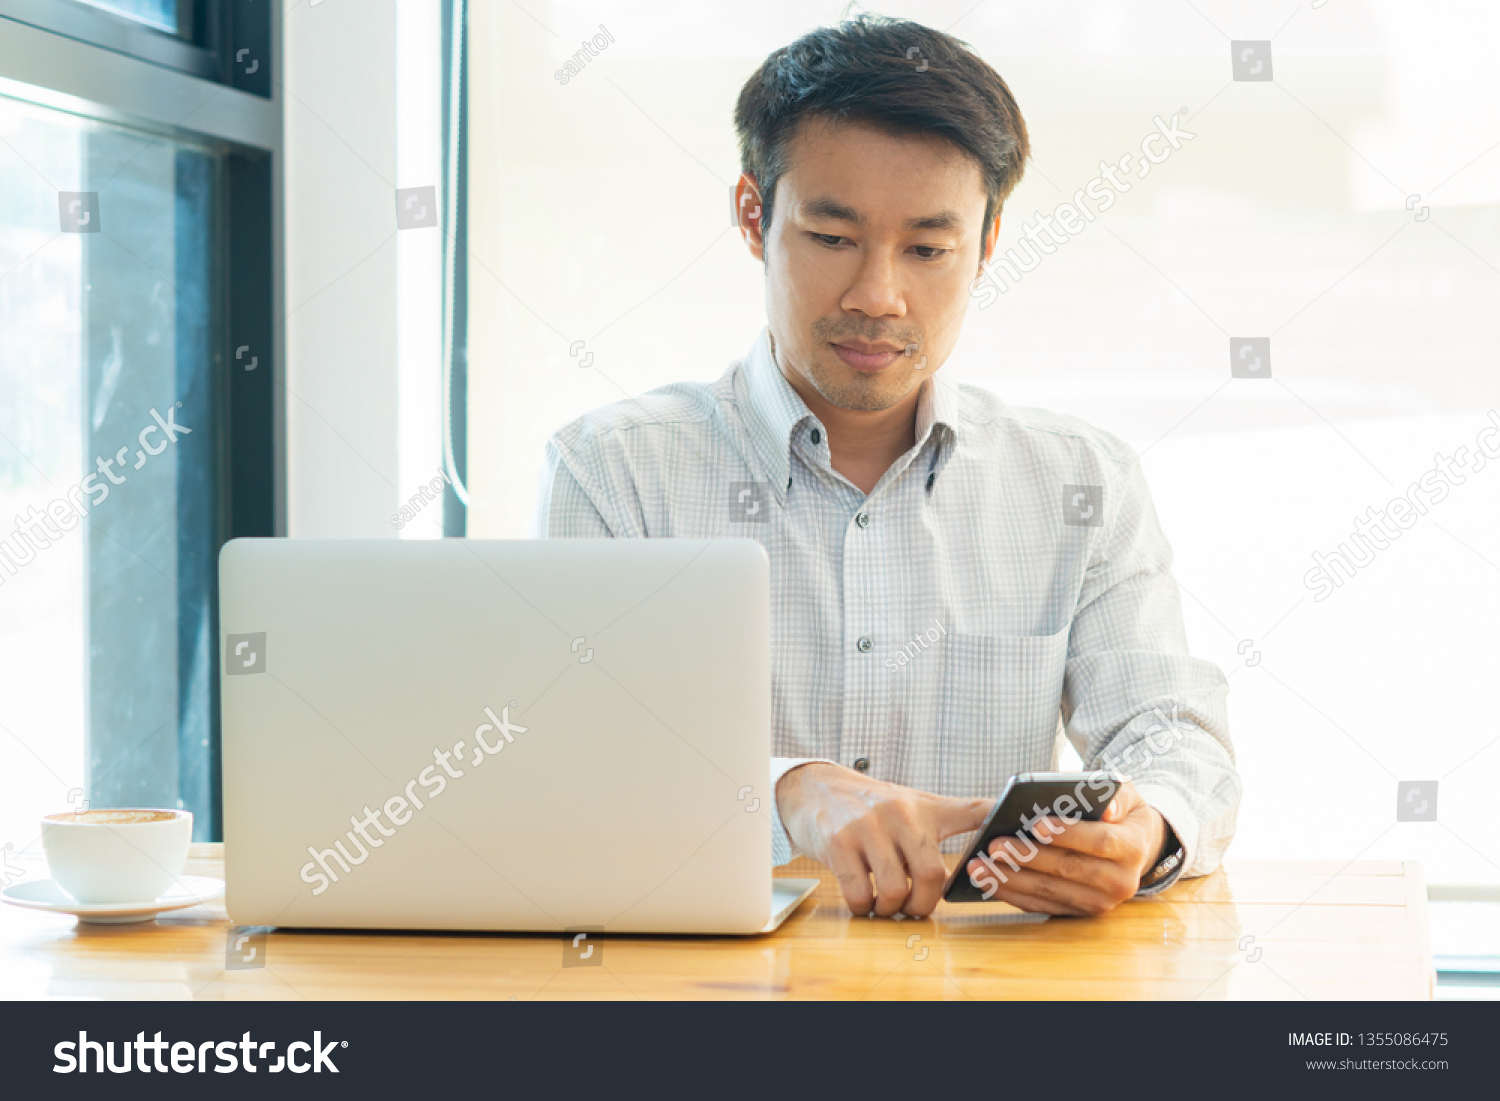 businessman working on a plan of Internet project on the laptop and working computer for internet research by smart phone. Digital marketing concept #1355086475